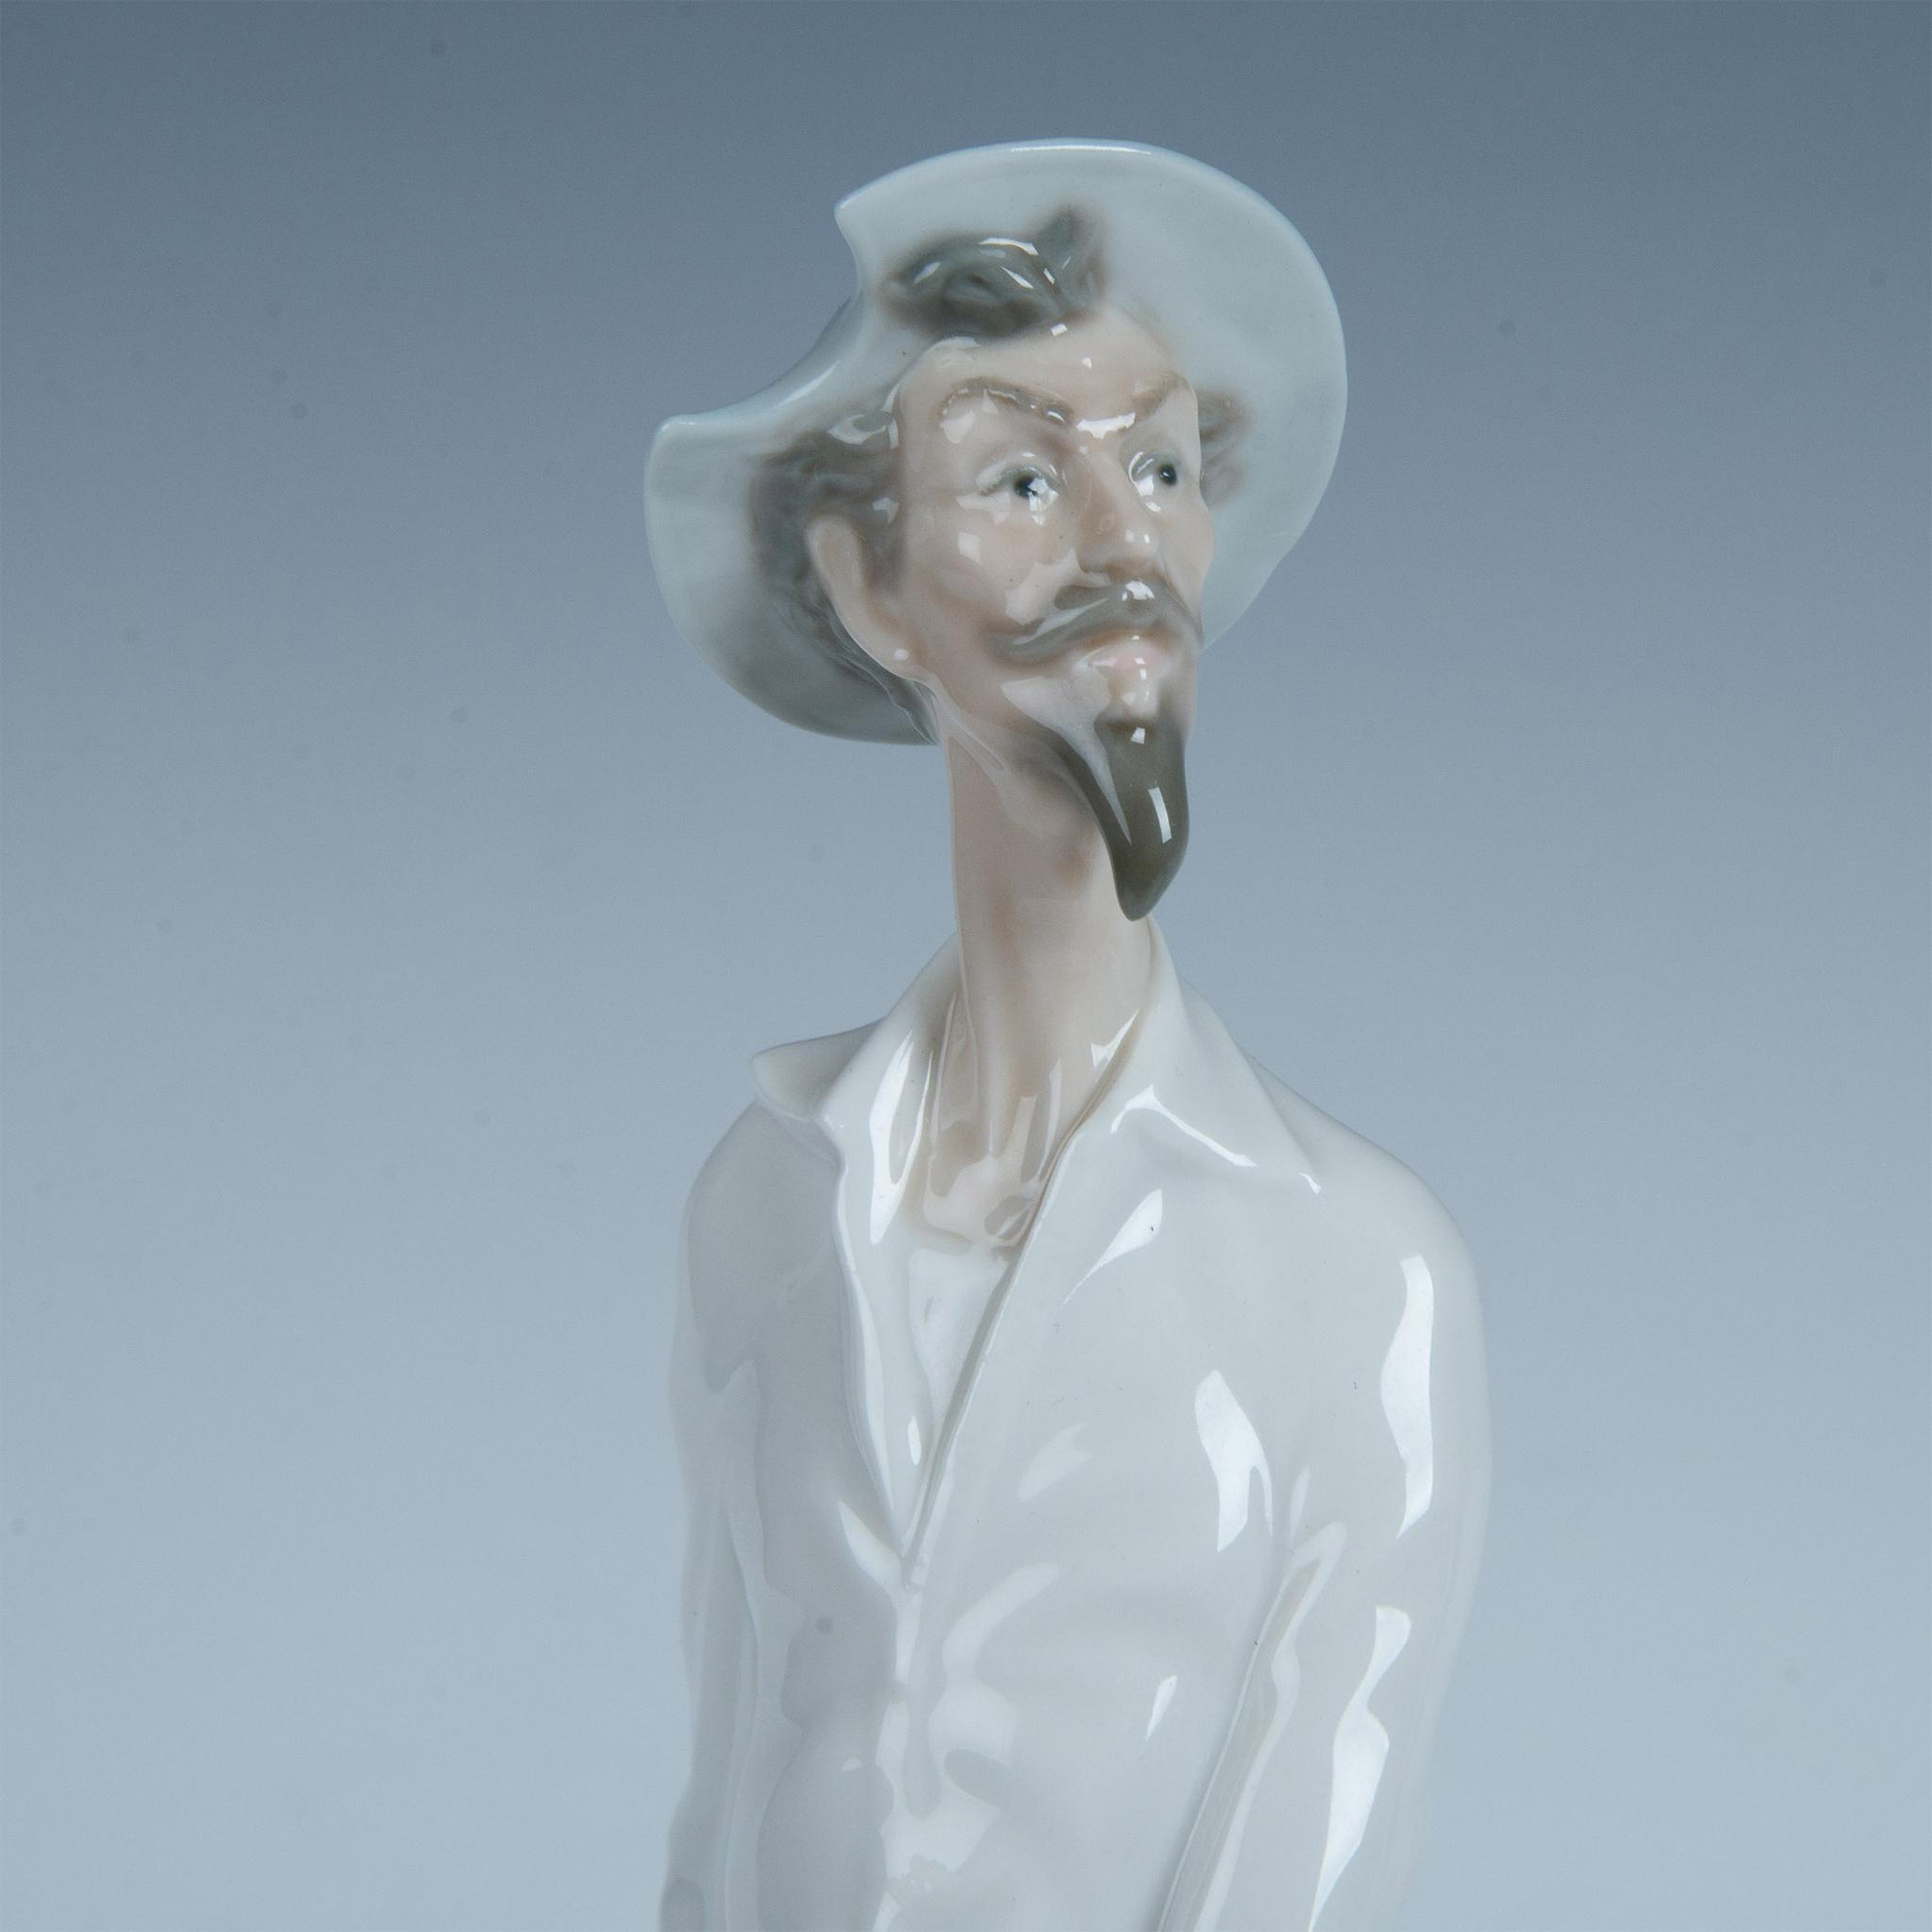 Don Quixote Standing Up 1004854 - Lladro Porcelain Figurine - Image 2 of 7